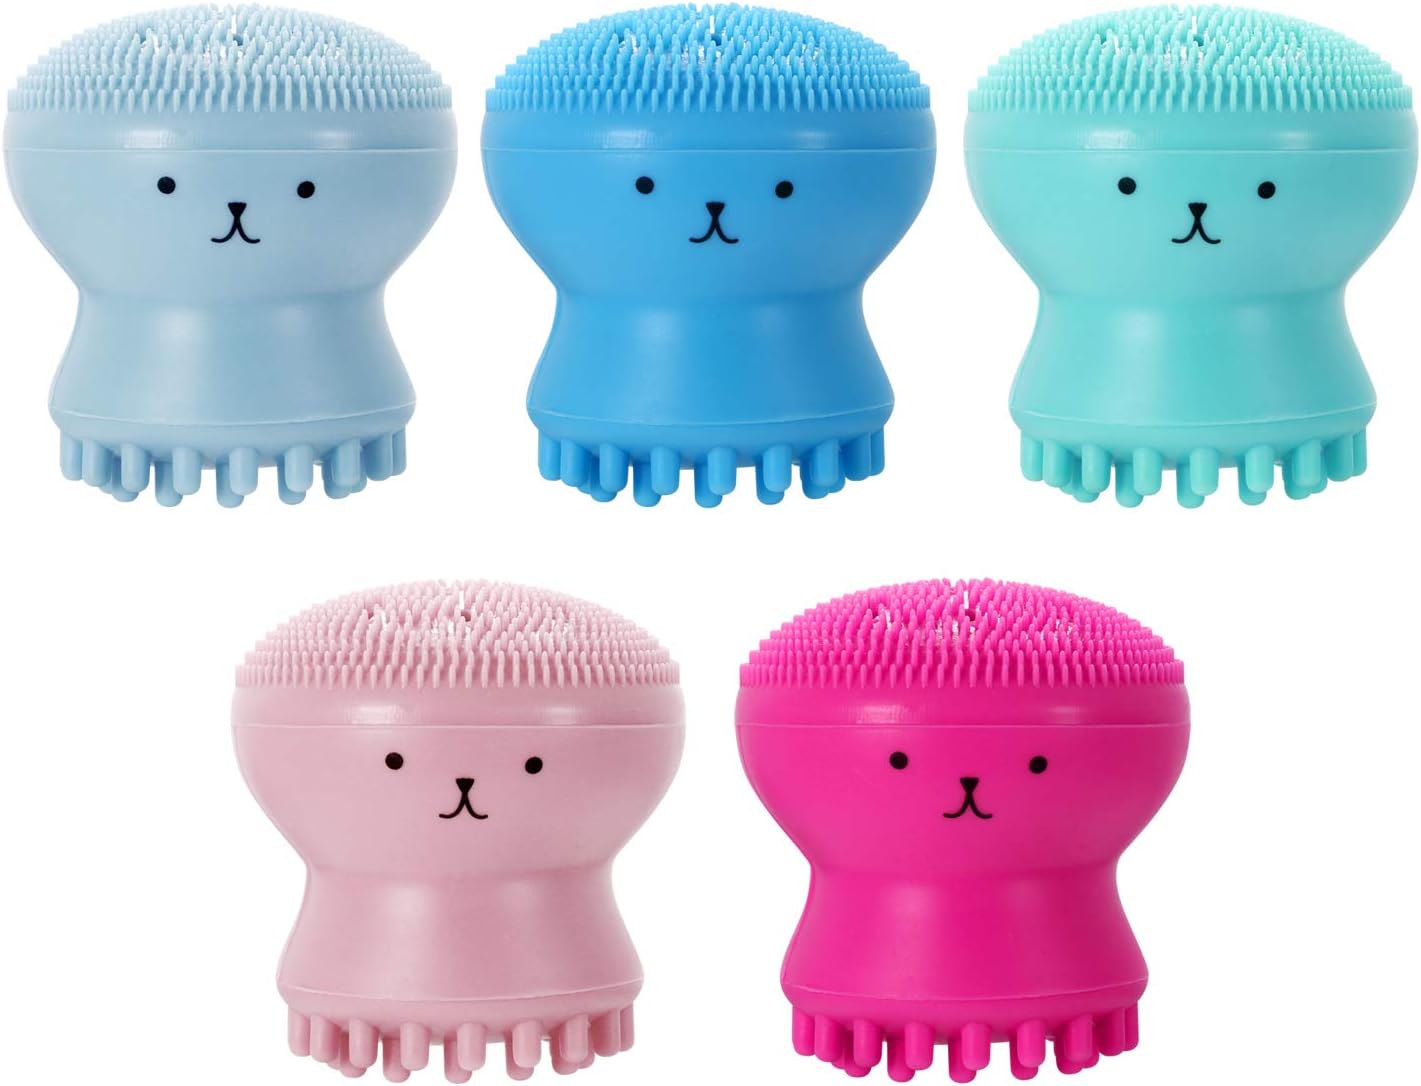 Silicone Face Cleansing/Cleaning Brush -Silicone Facial Cleansing/Cleaning Brush Pore Cleaner Exfoliator Scrub Washing Skin Care Octopus Shape - Deliverrpk